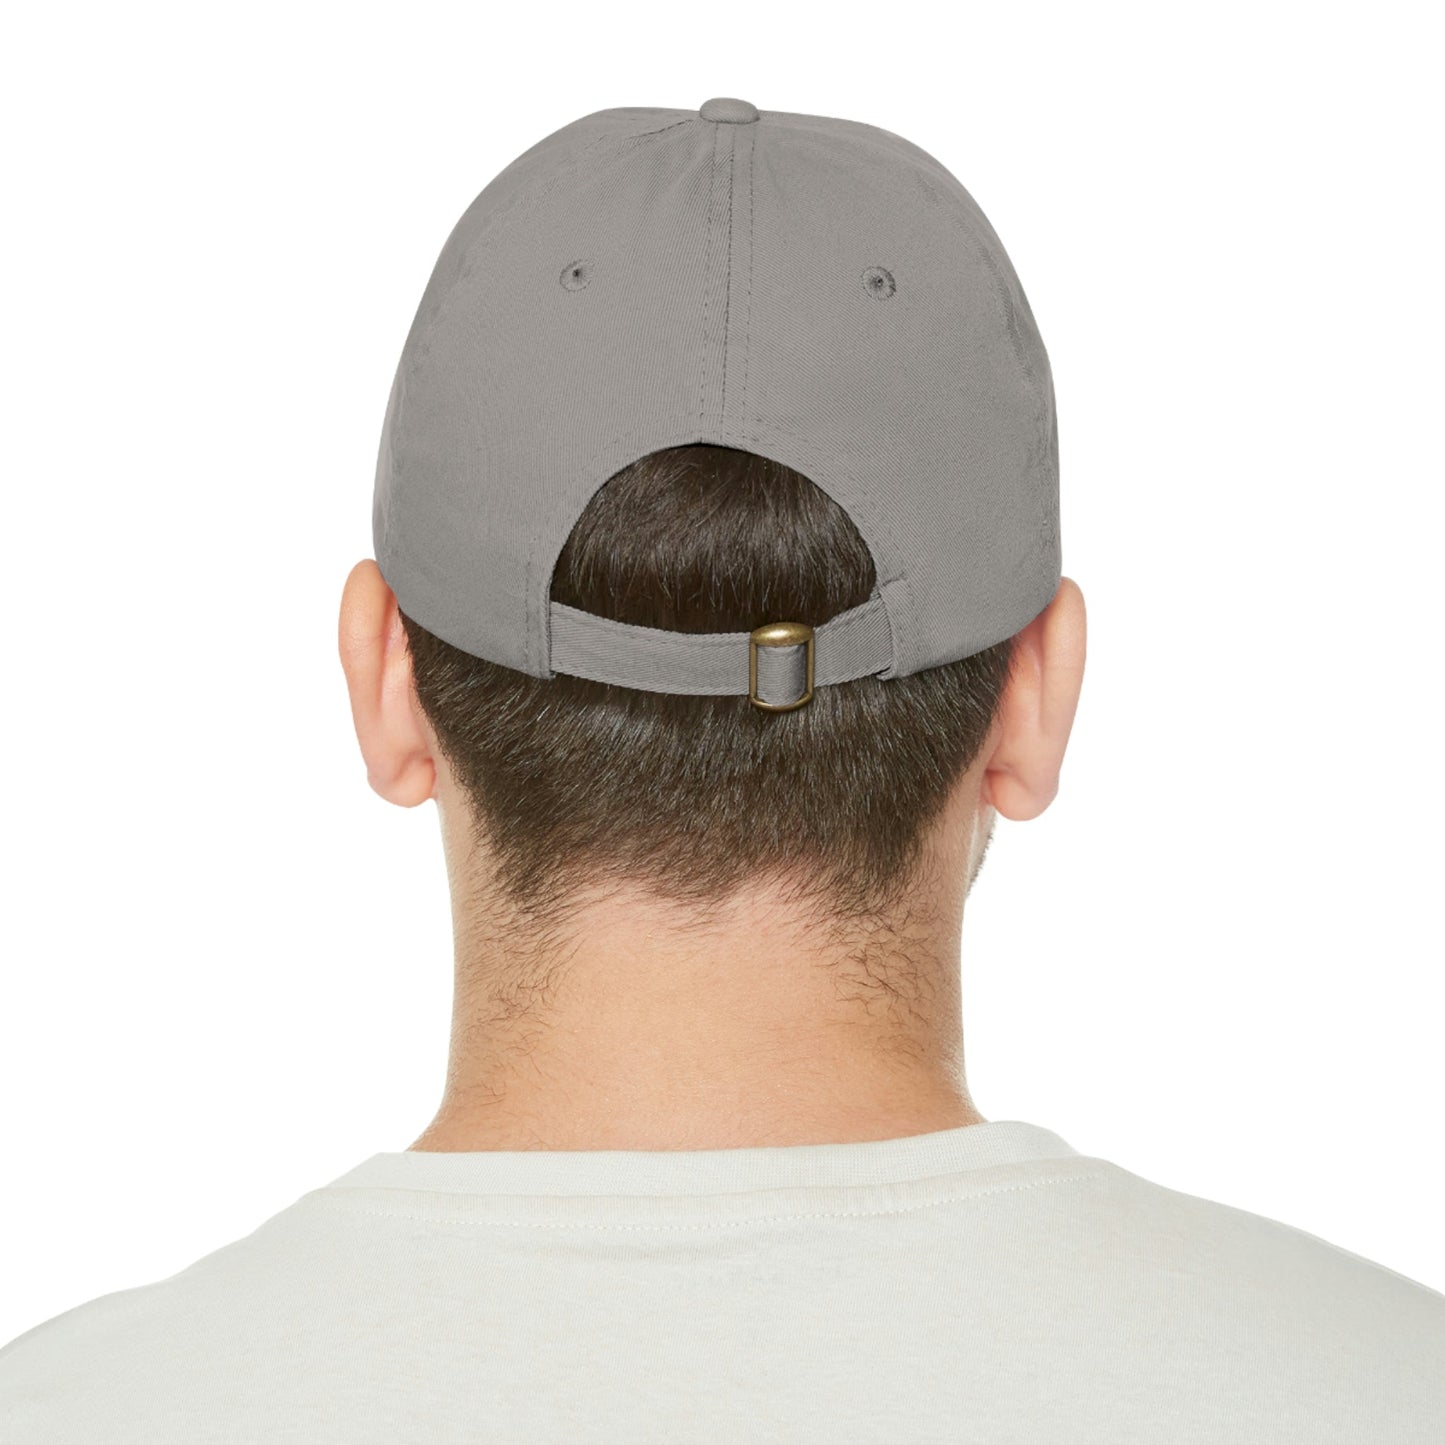 Pilot Mountain NC Dad Hat with Leather Patch - Appalachian Bittersweet - dad hat